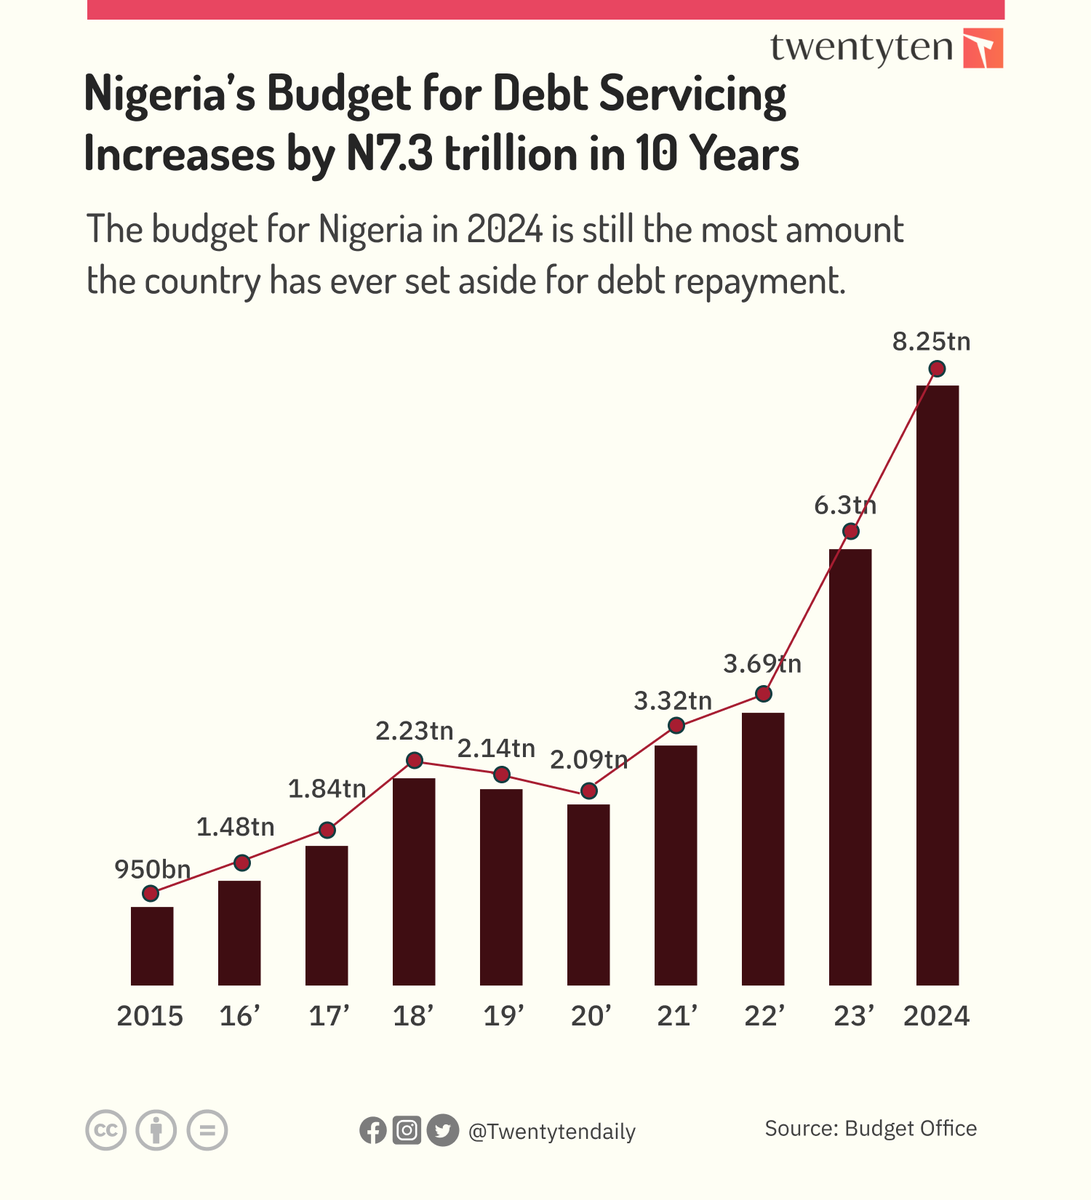 Nigeria's budget for debt servicing climbs by 7.3 trillion in just 10 years, underscoring the nation's evolving fiscal landscape. A pivotal moment in economic policy and financial strategy. 
#Nigeria #DebtServicing #EconomicGrowth #Naira 
#Twentytendaily